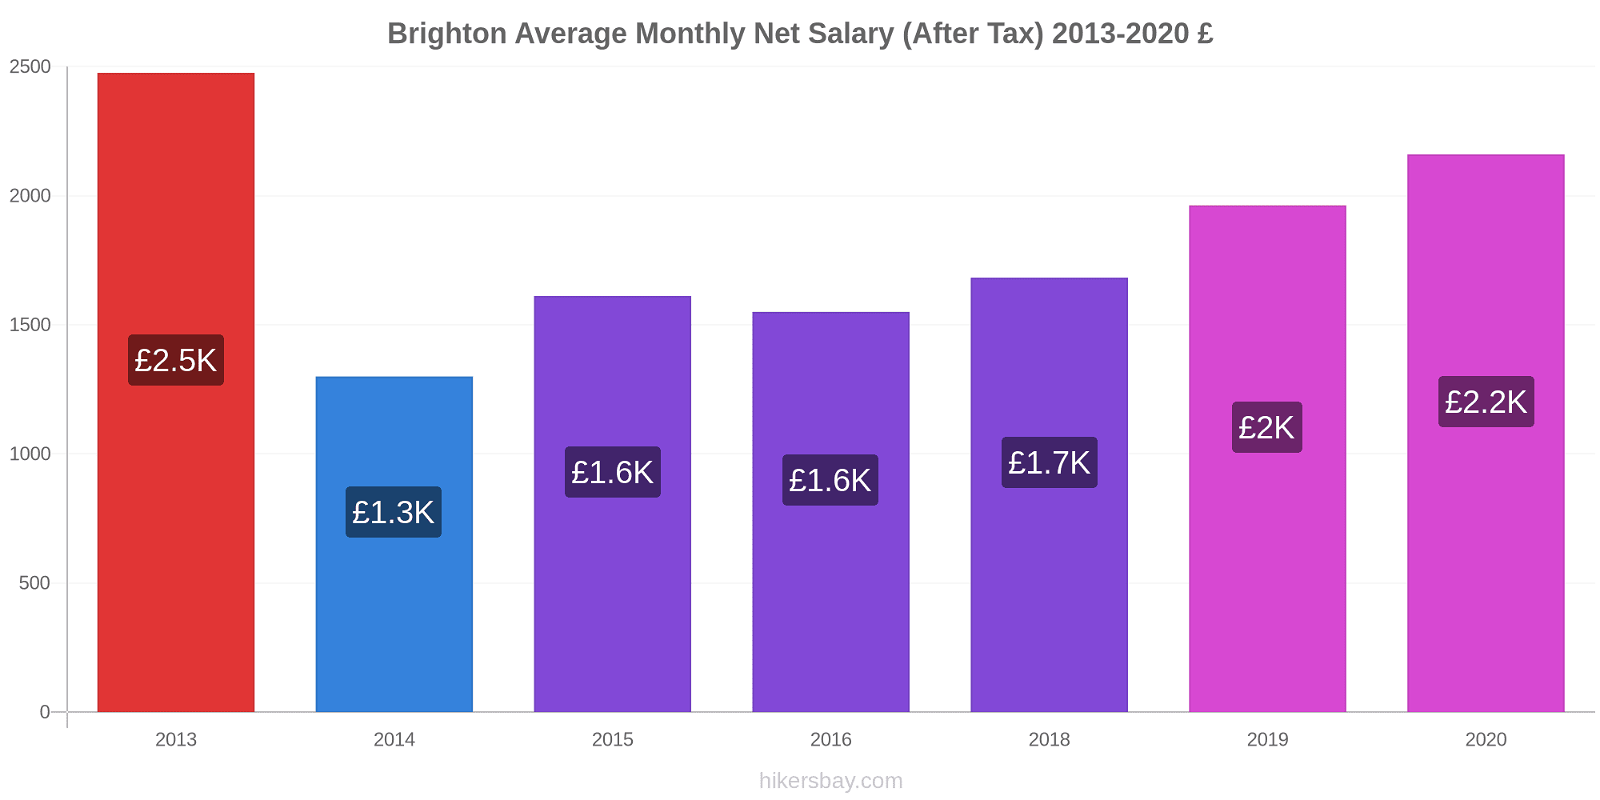 Brighton price changes Average Monthly Net Salary (After Tax) hikersbay.com